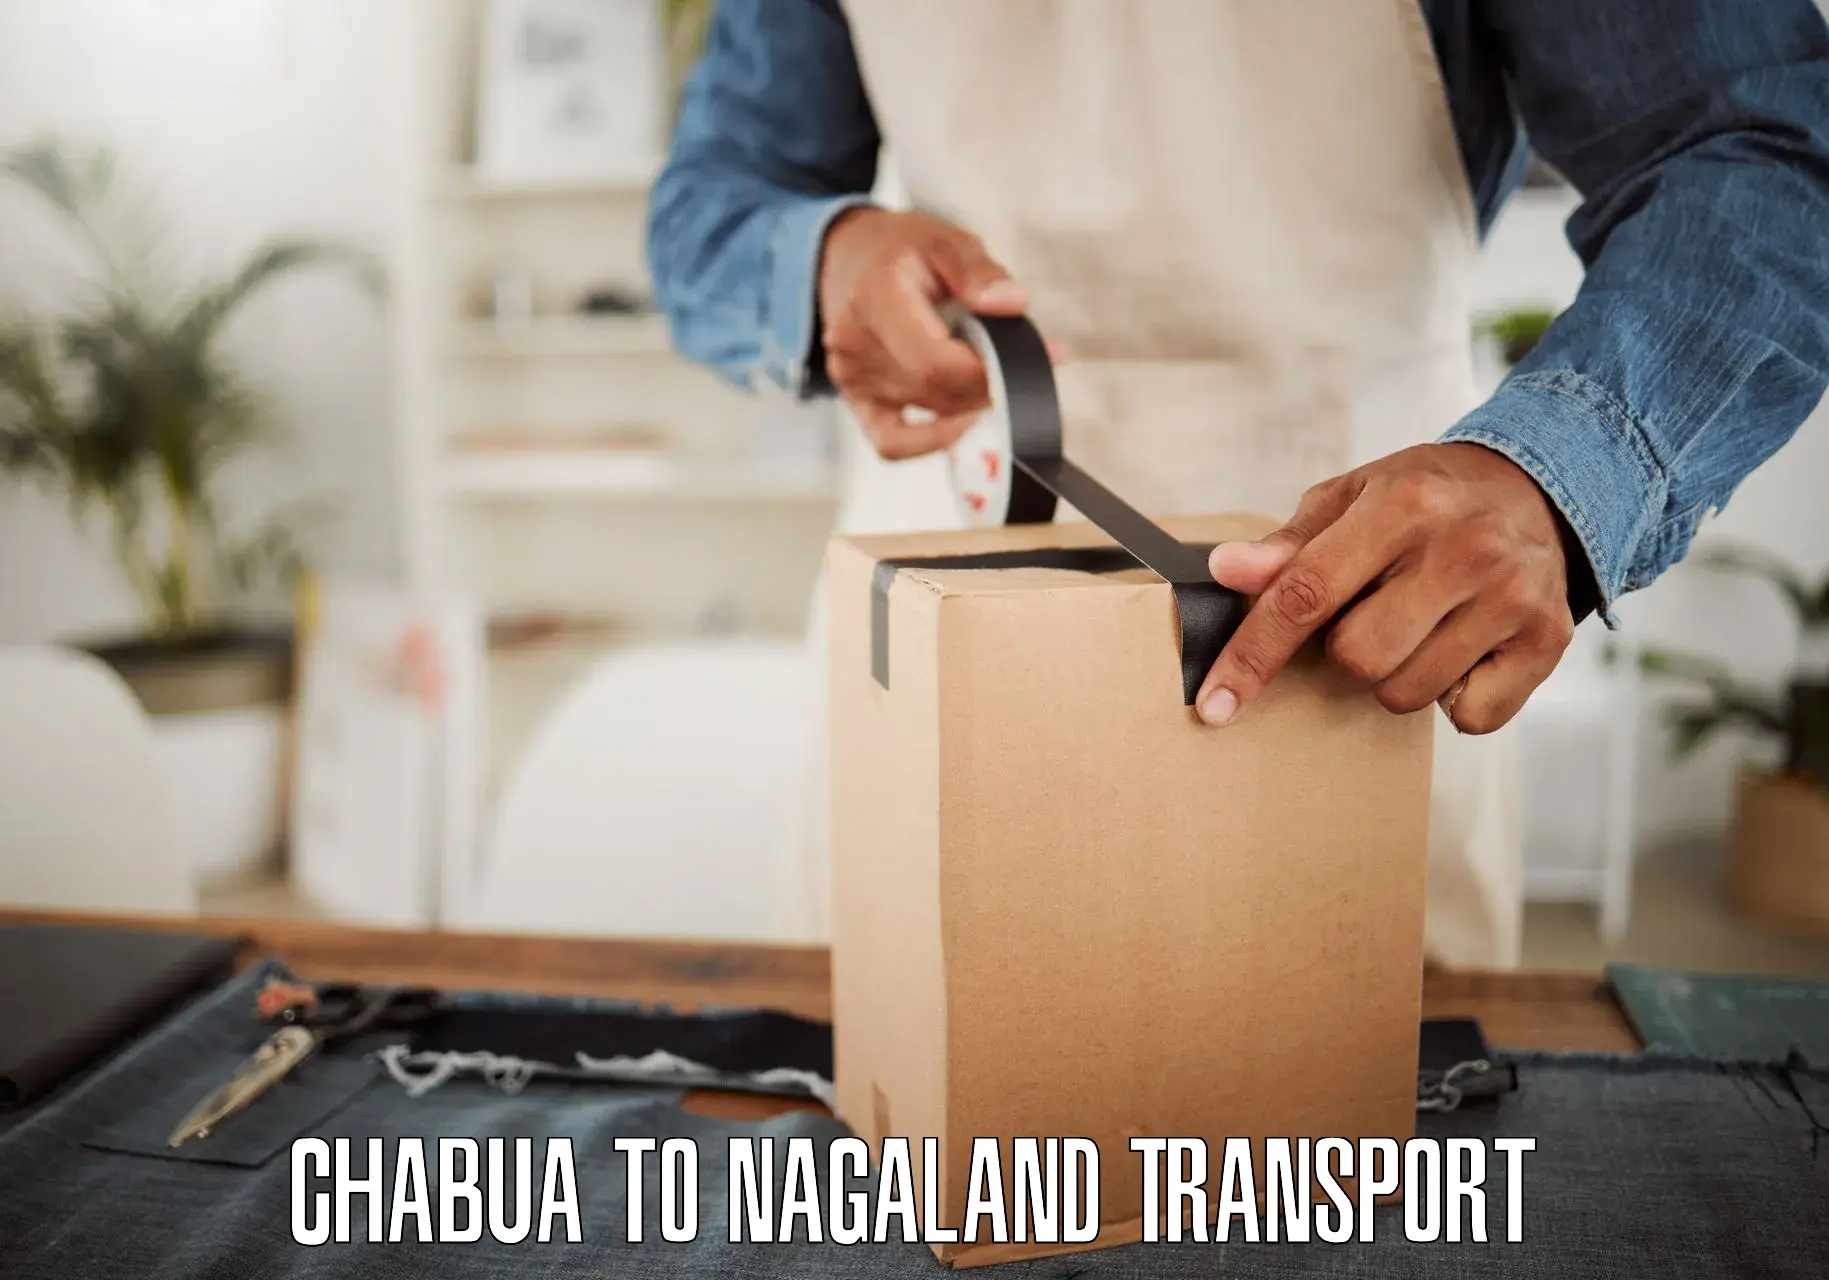 Commercial transport service Chabua to Mon